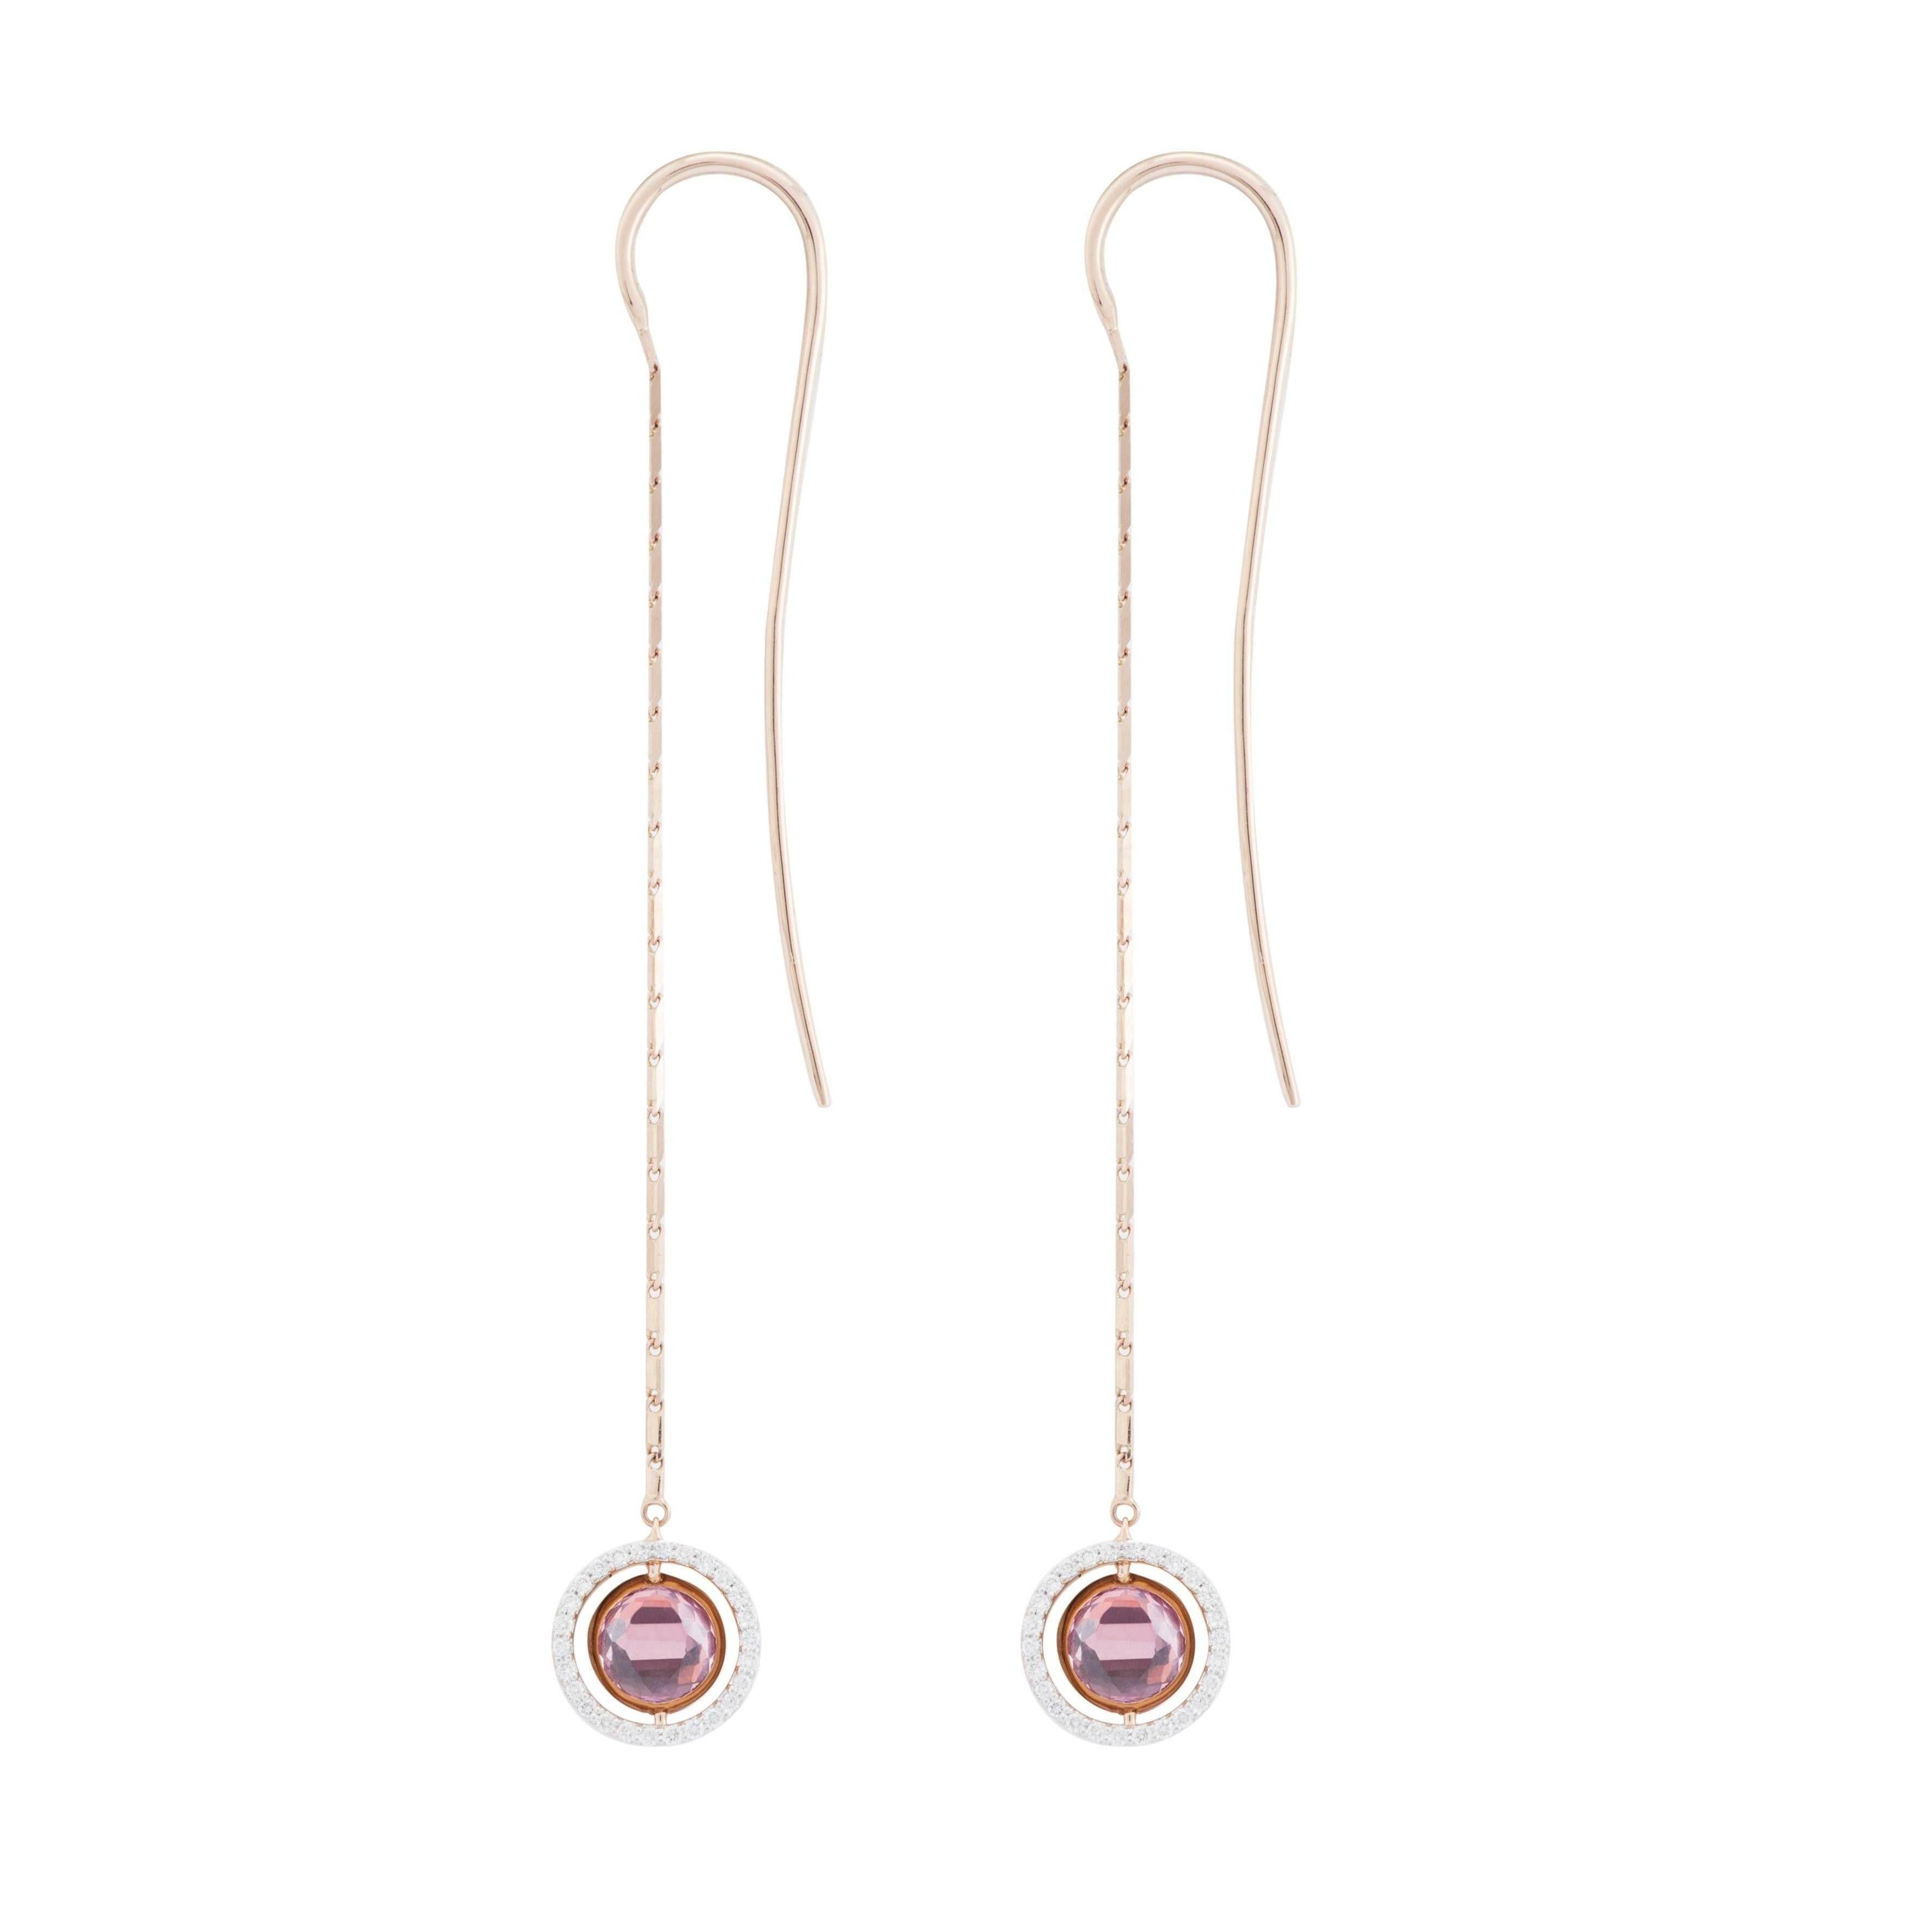 This pair of long earrings are from the French Jewelry brand Marie Mas. 
They are made in 18 Karat Rose Gold and are 7,5 cm long. The diameter of the round element is 10 mm.
On each Earring, the round element is reversible : there is a Pink Amethyst